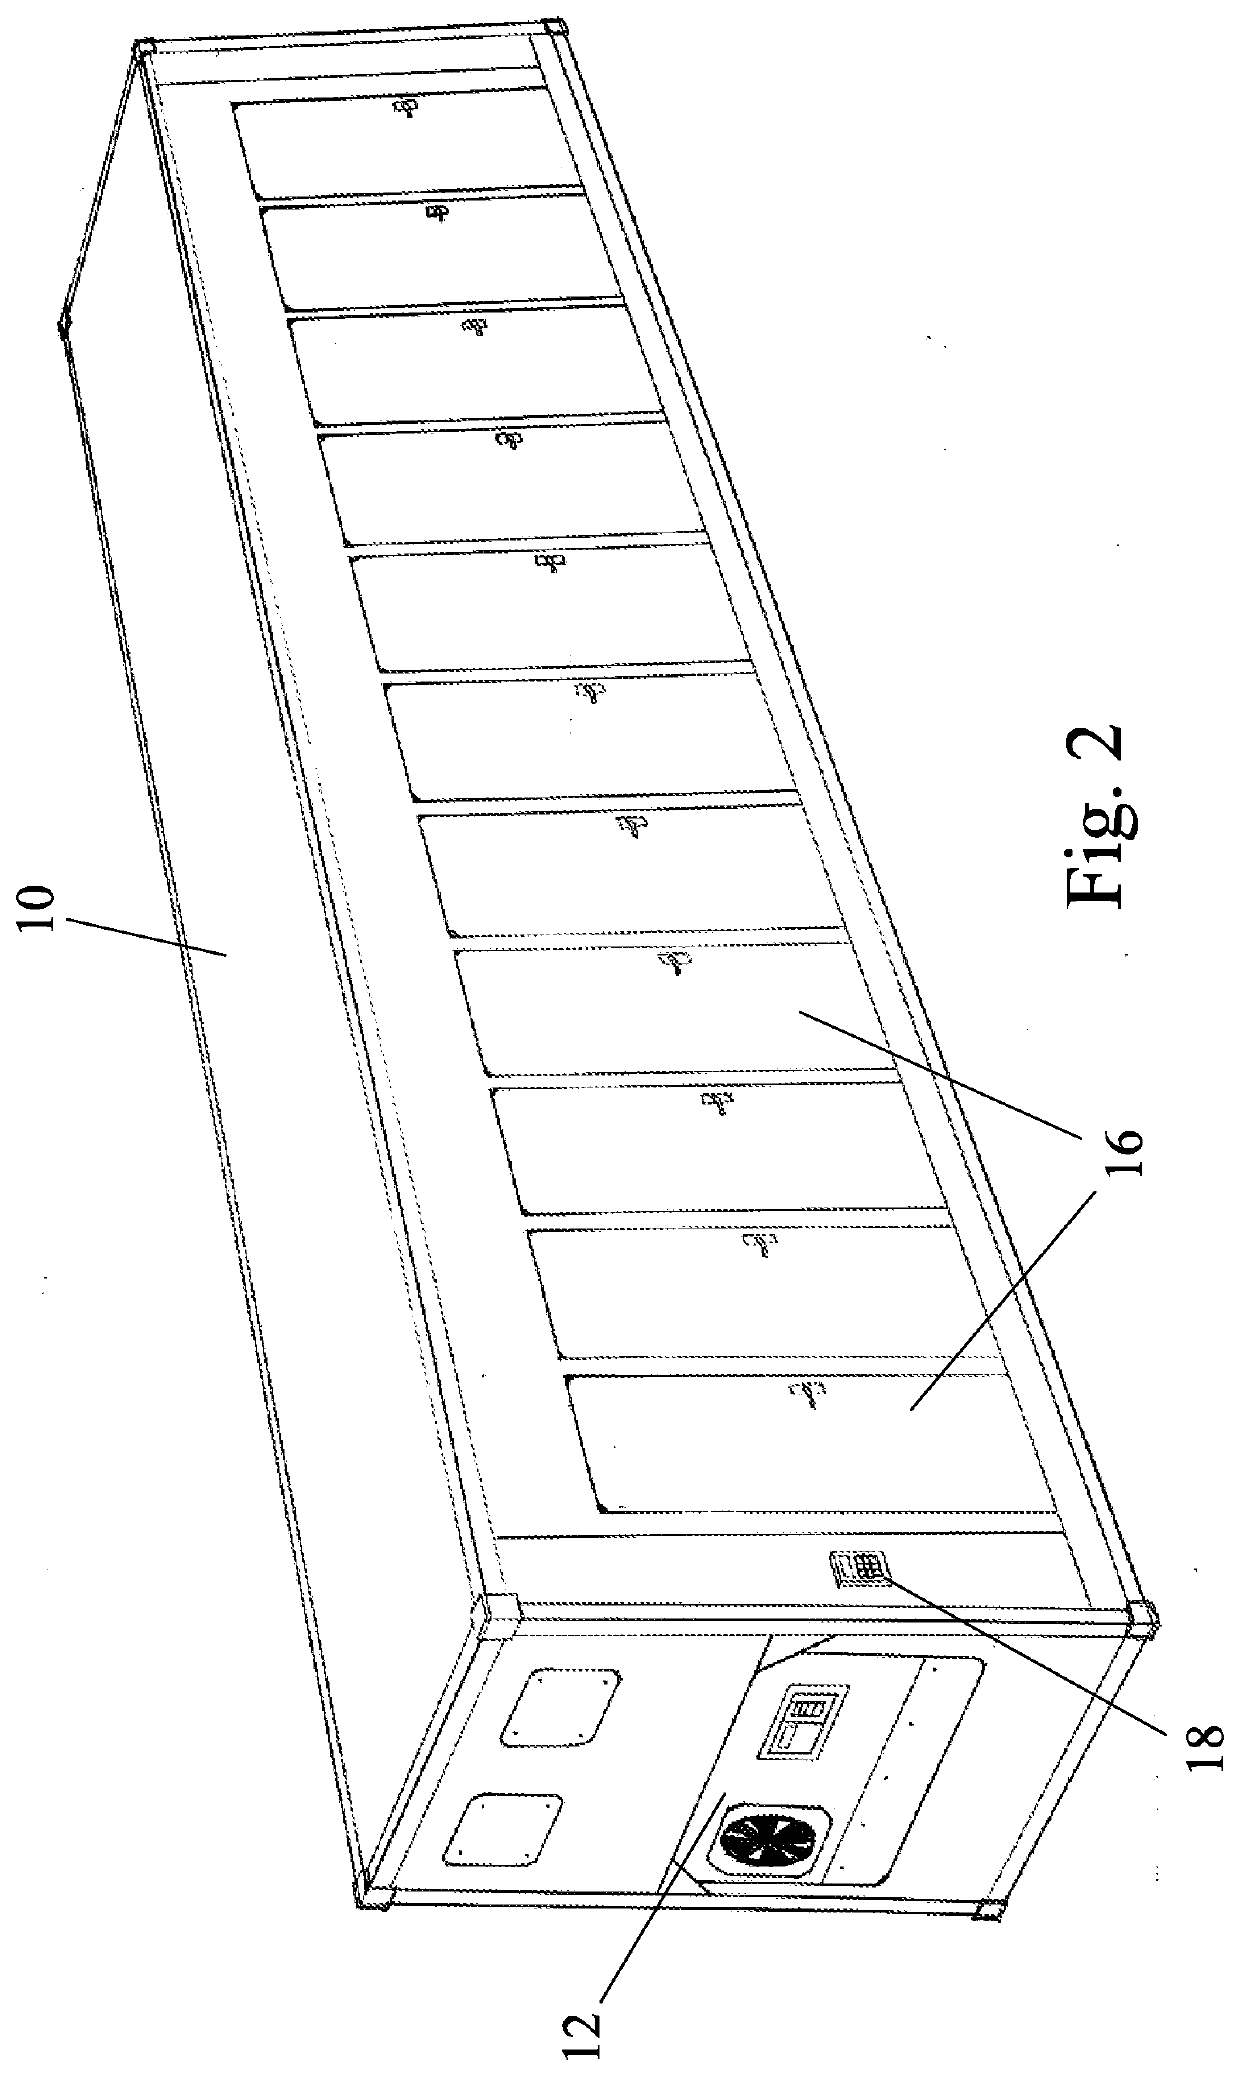 Transportable refrigerated container and method of distribution of perishable goods